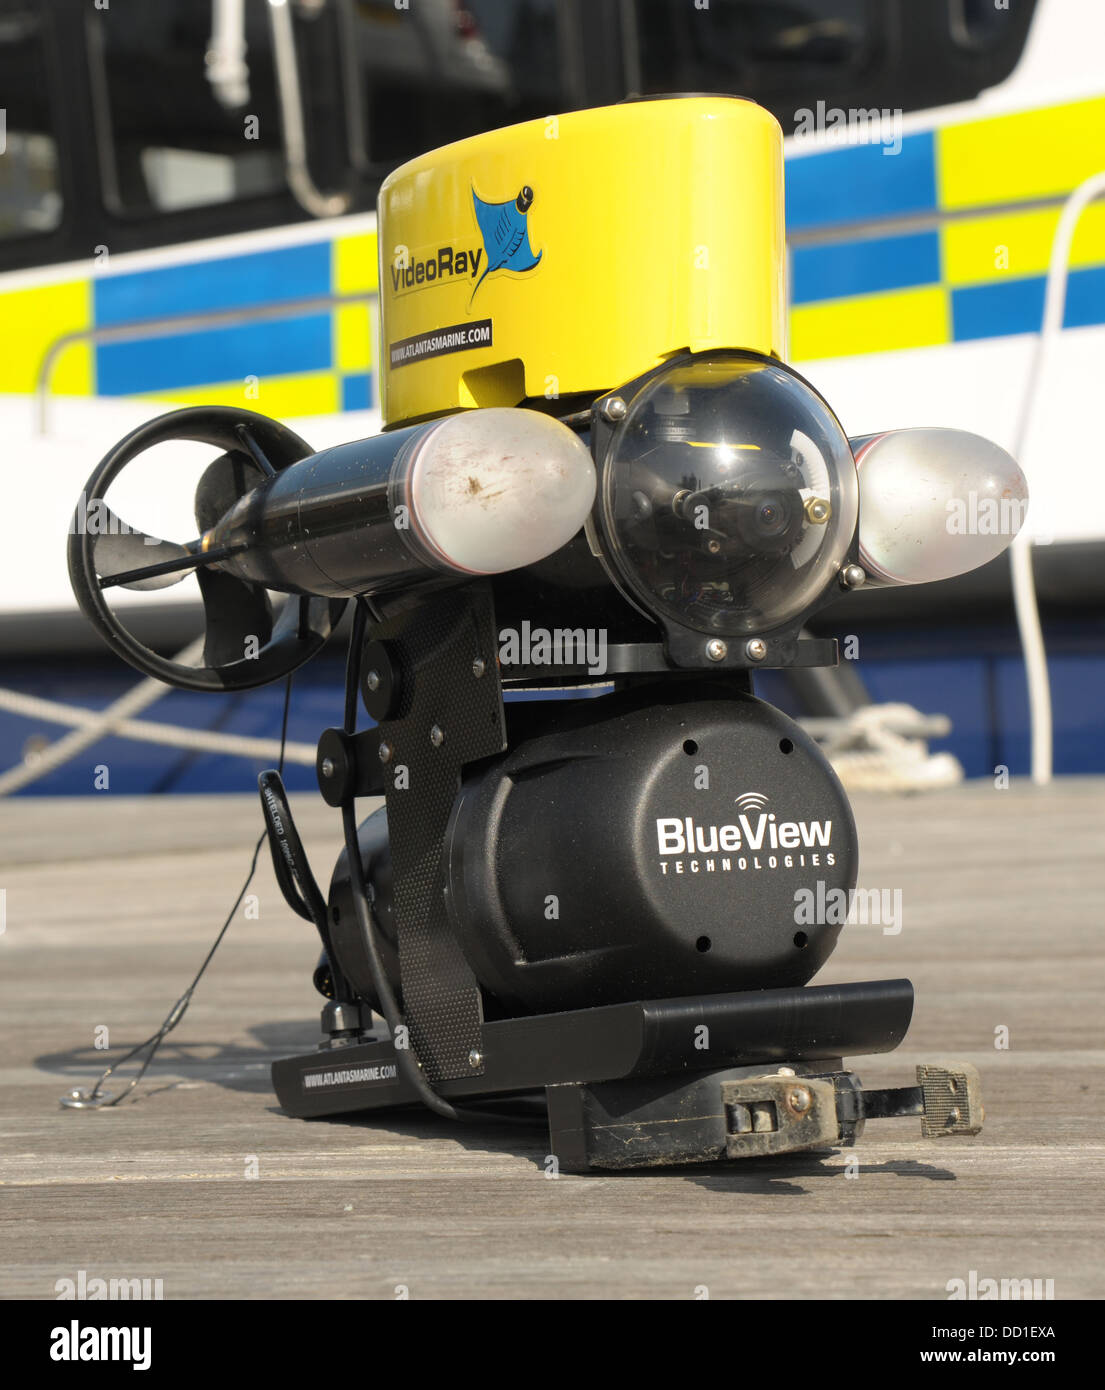 A police operated ROV robot submarine used in the fight against crime. Stock Photo